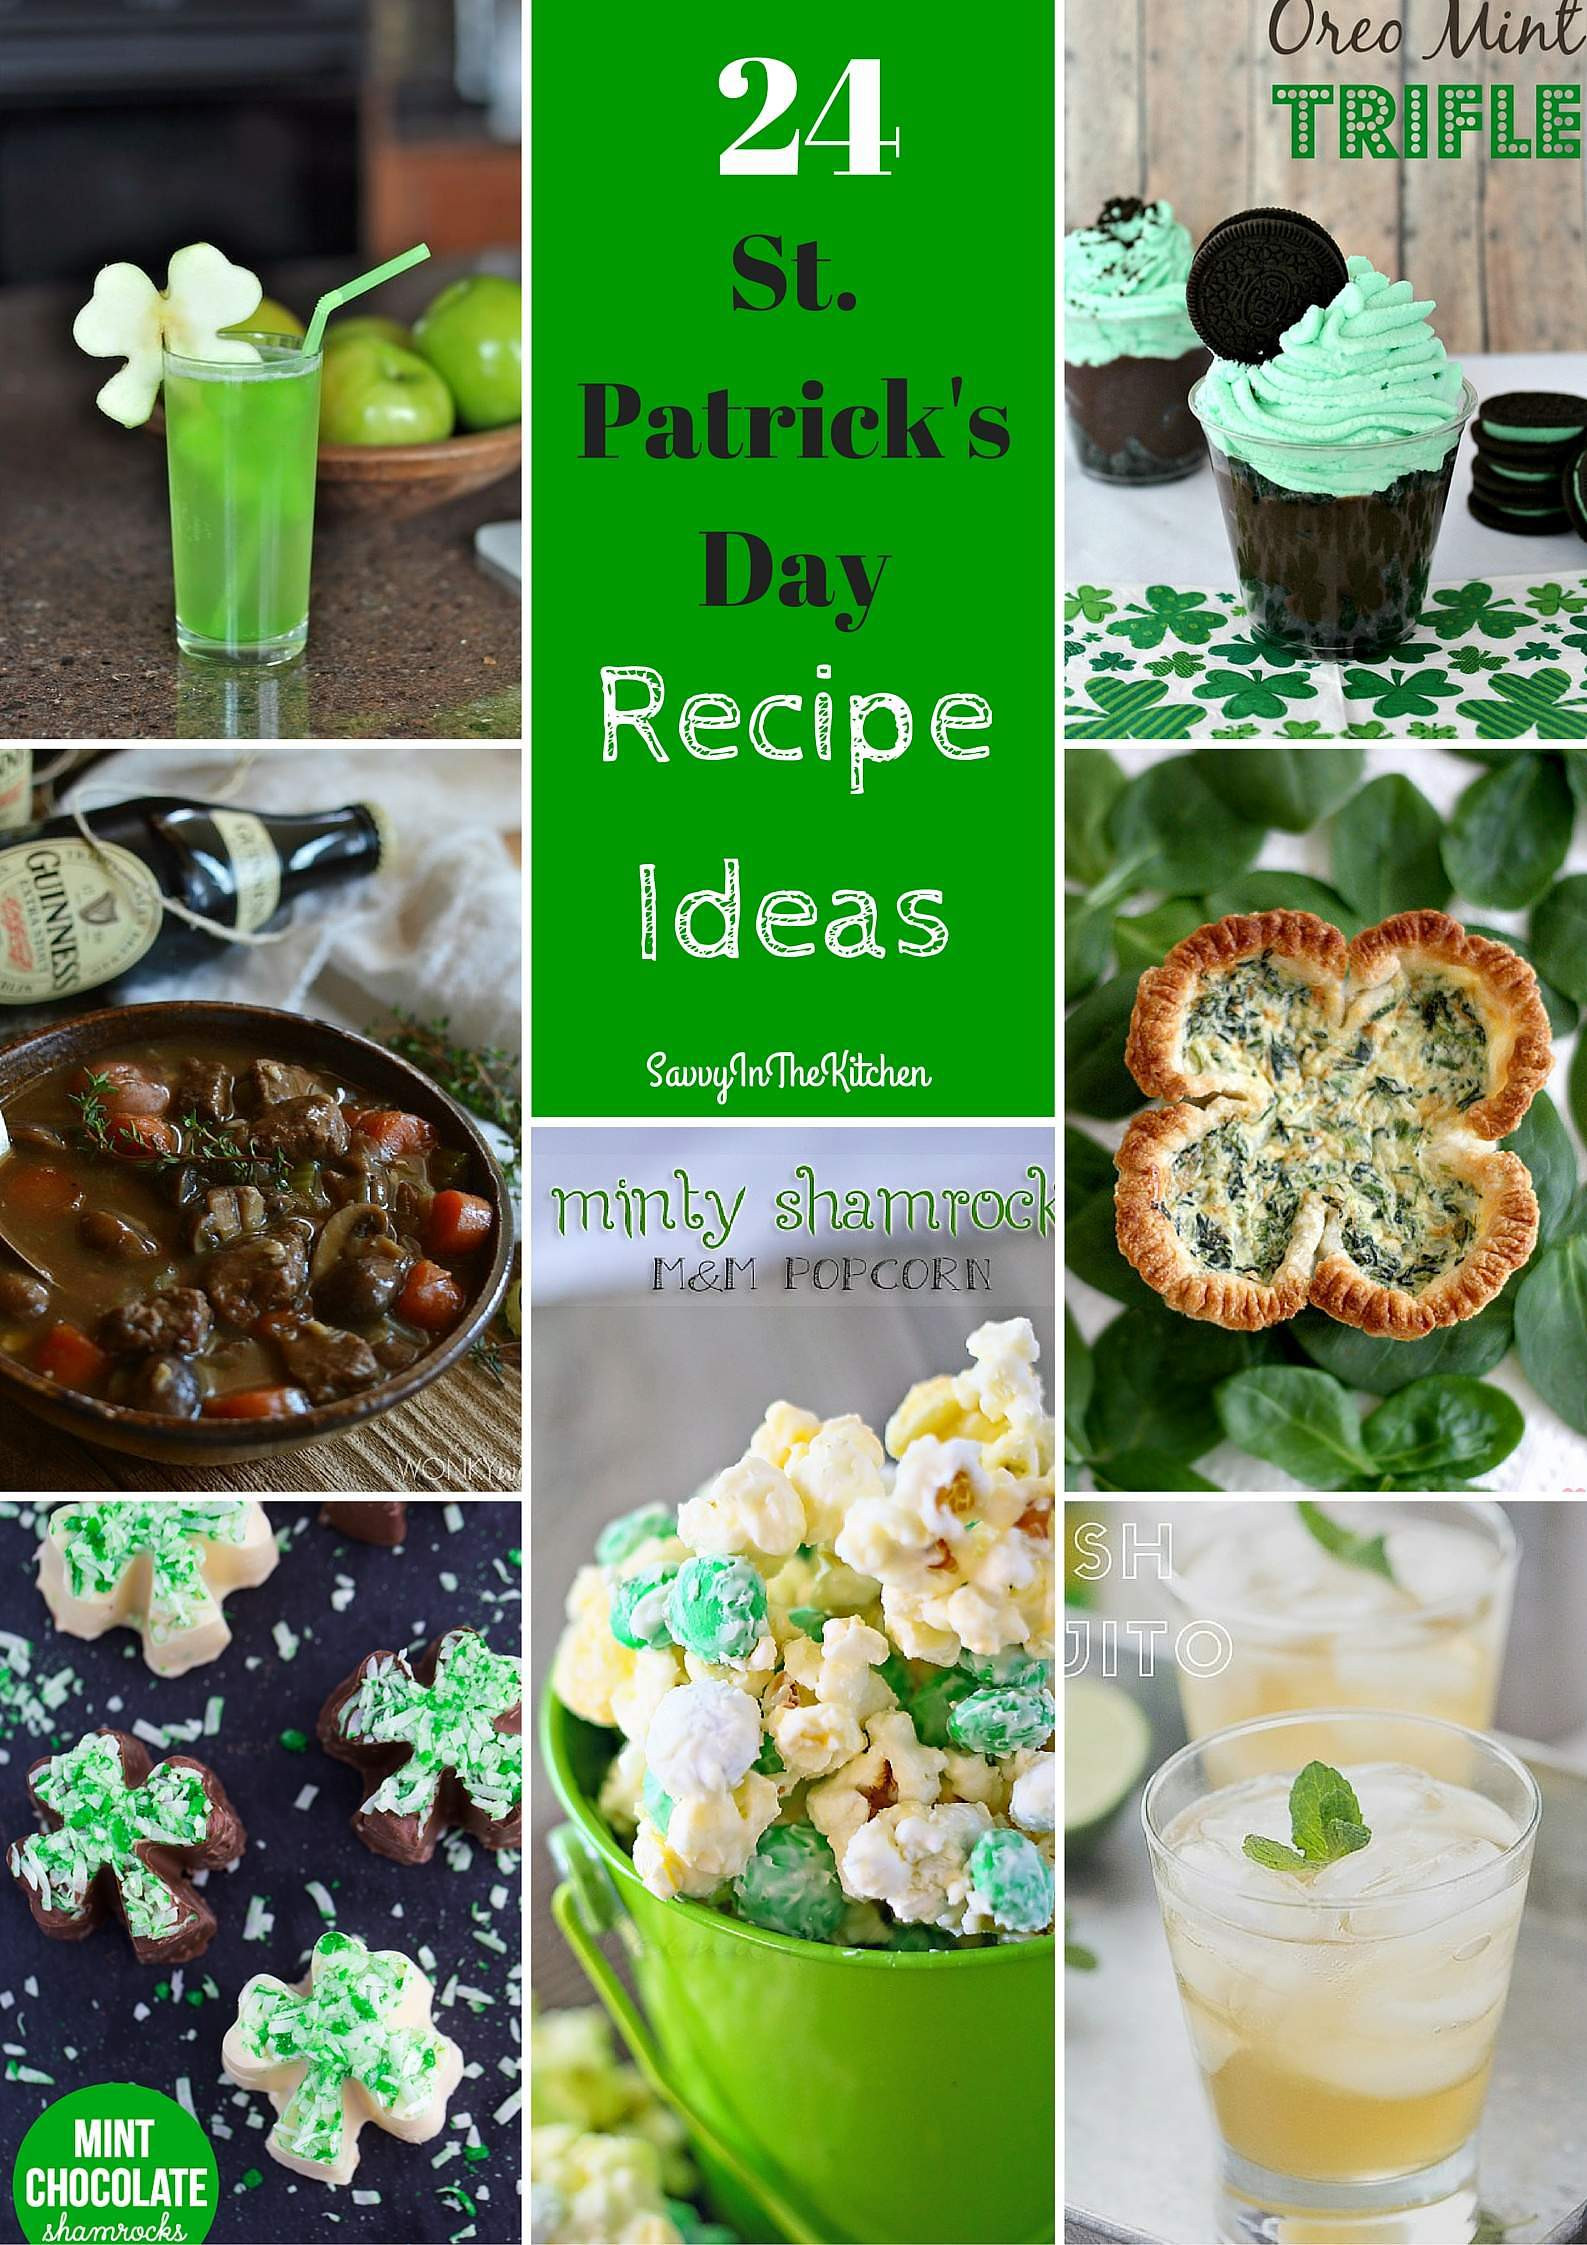 Saint Patrick's Day Food Ideas
 24 St Patrick s Day Recipe Ideas Savvy In The Kitchen